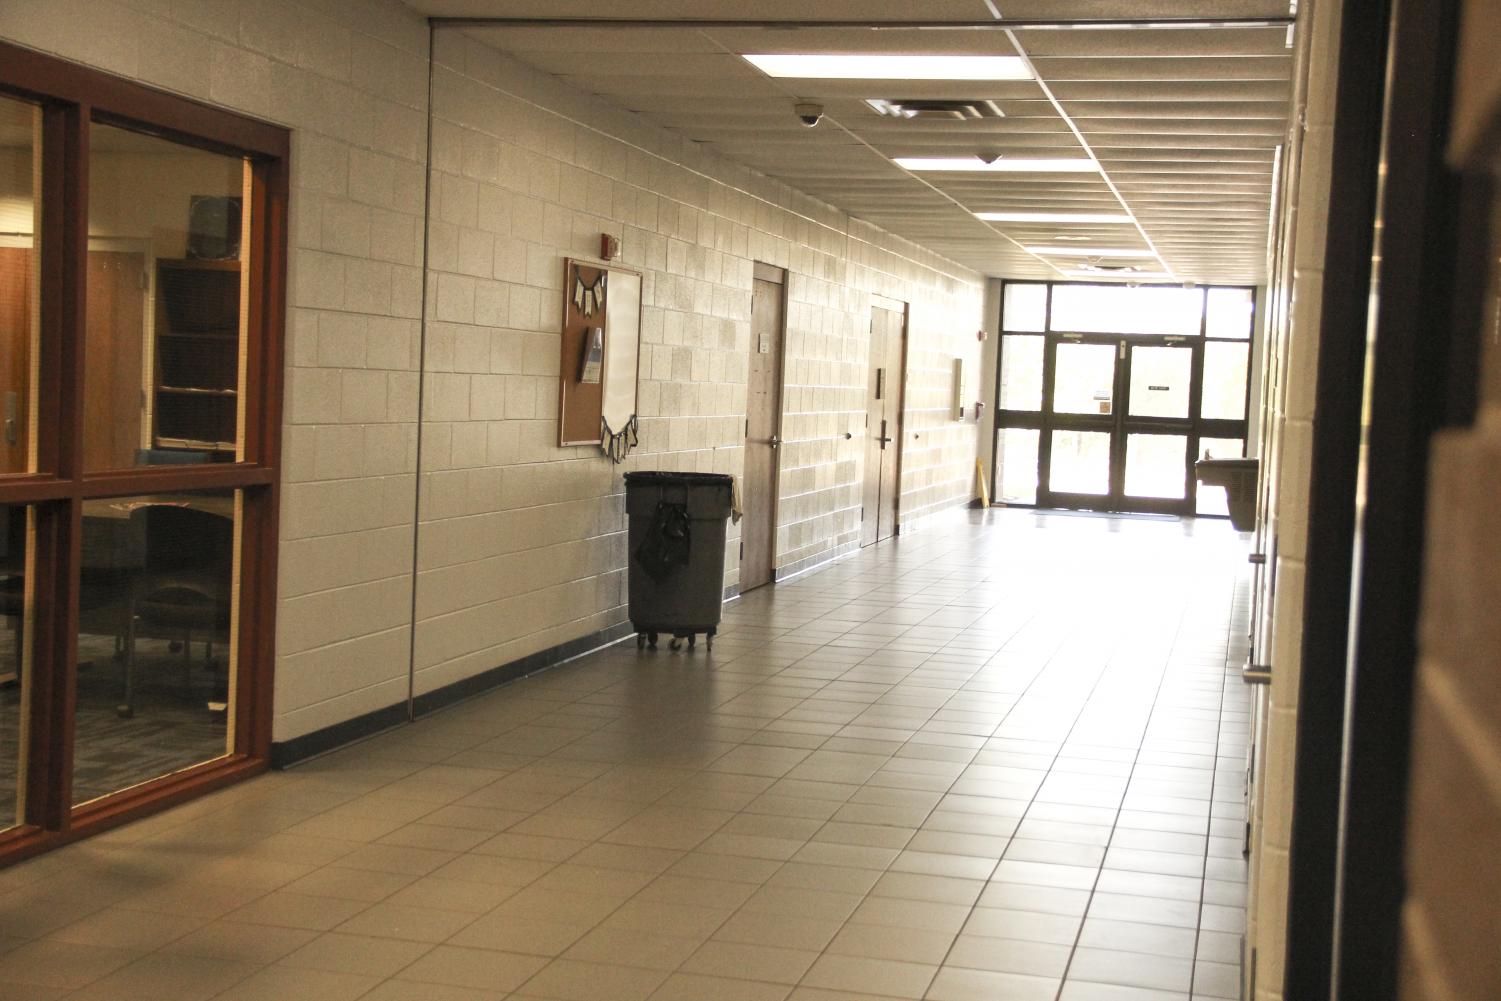 Science classes will now exit through this hallway and stand in front of the Performing Arts Center. This will be in place until construction ends.